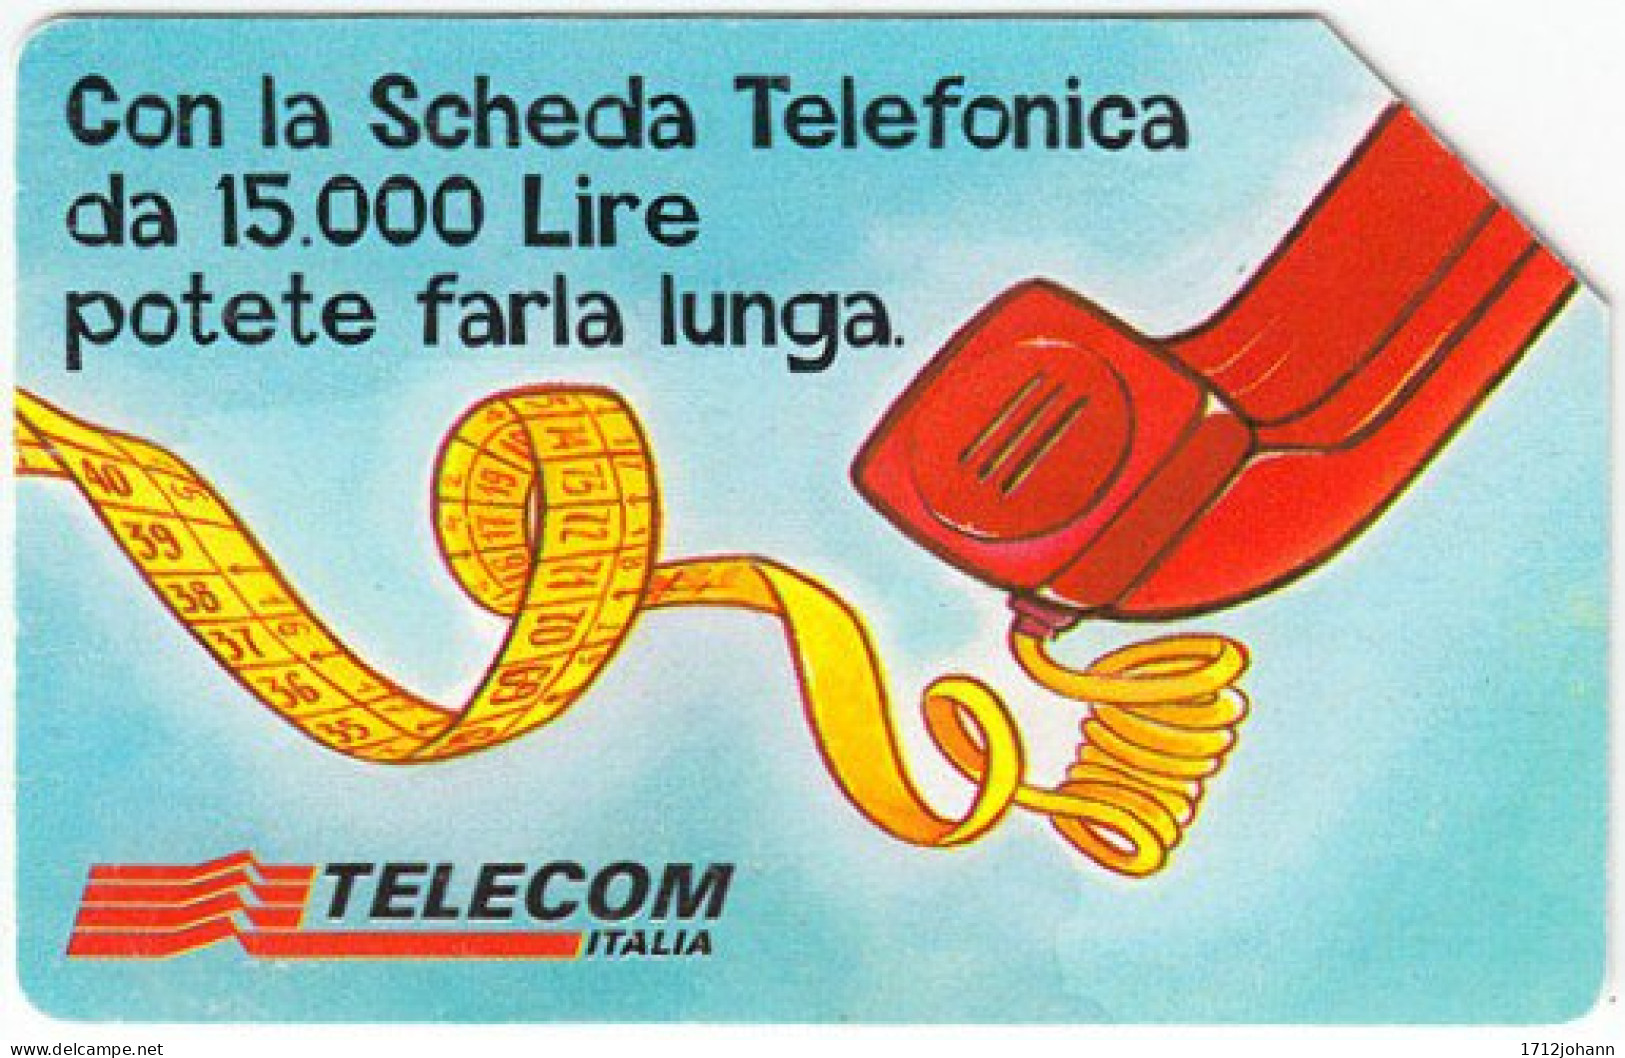 ITALY A-997 Magnetic SIP - Cartoon, Communication, Telephone - (10.000 L) Exp. 31.12.99 - Used - Public Practical Advertising